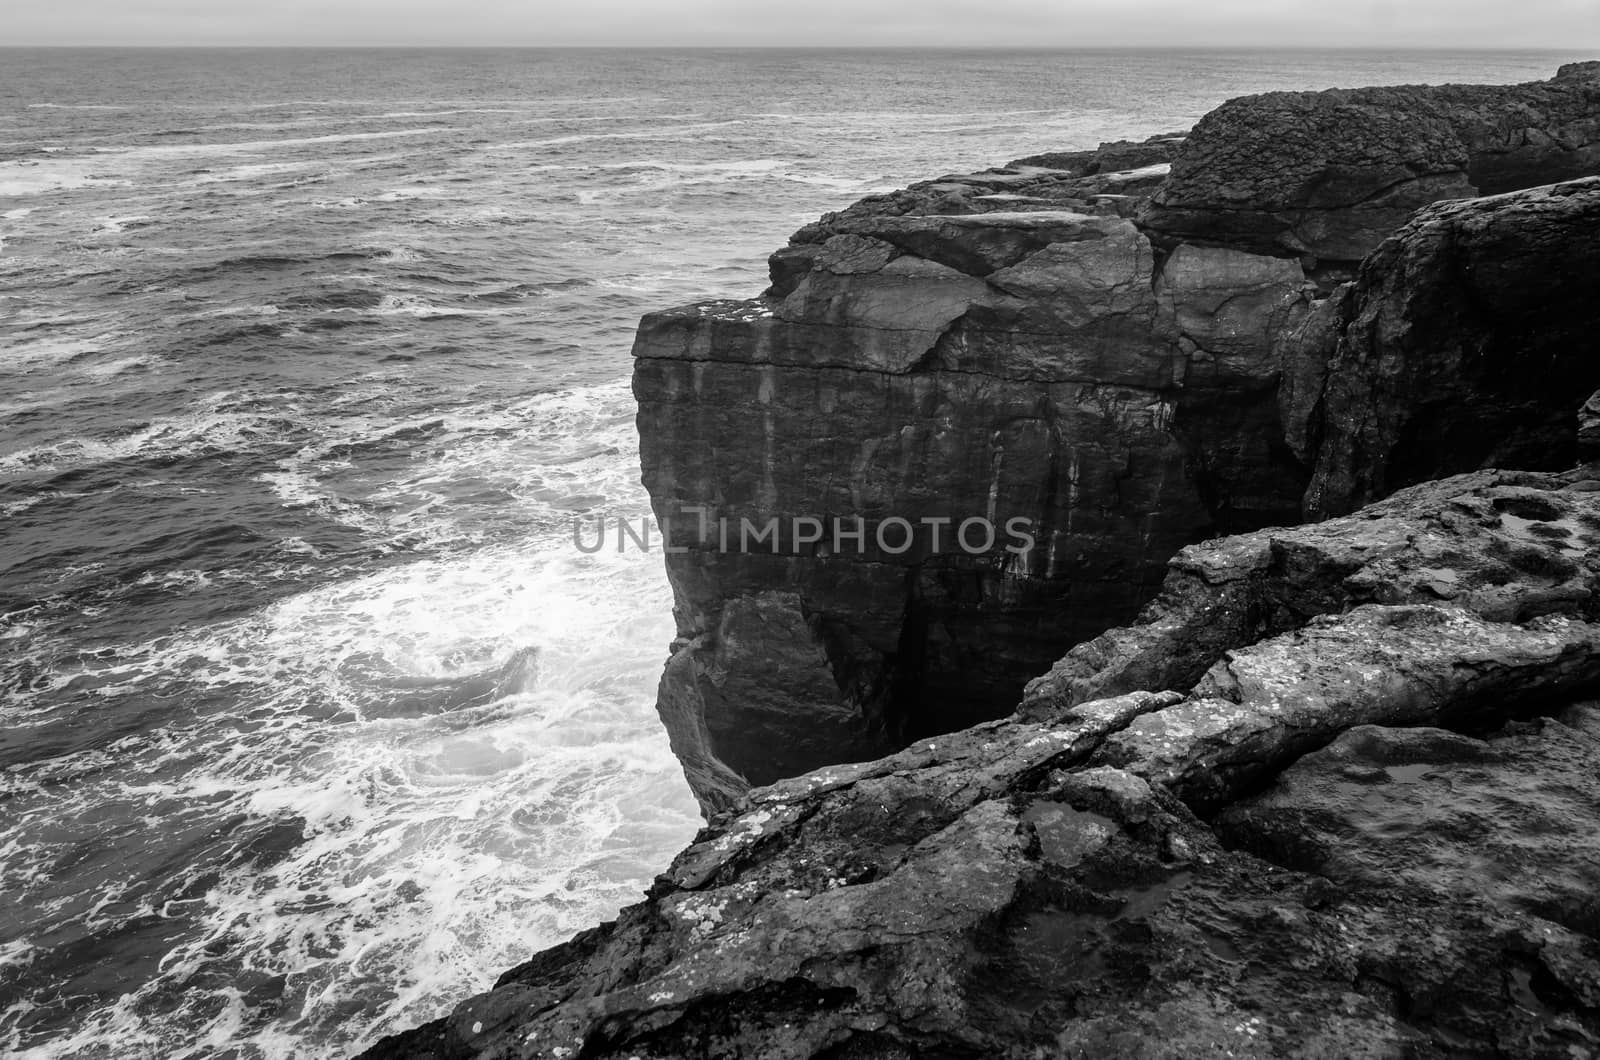 Black and white seascape of Irish cliffs battered by waves, Ireland by mauricallari